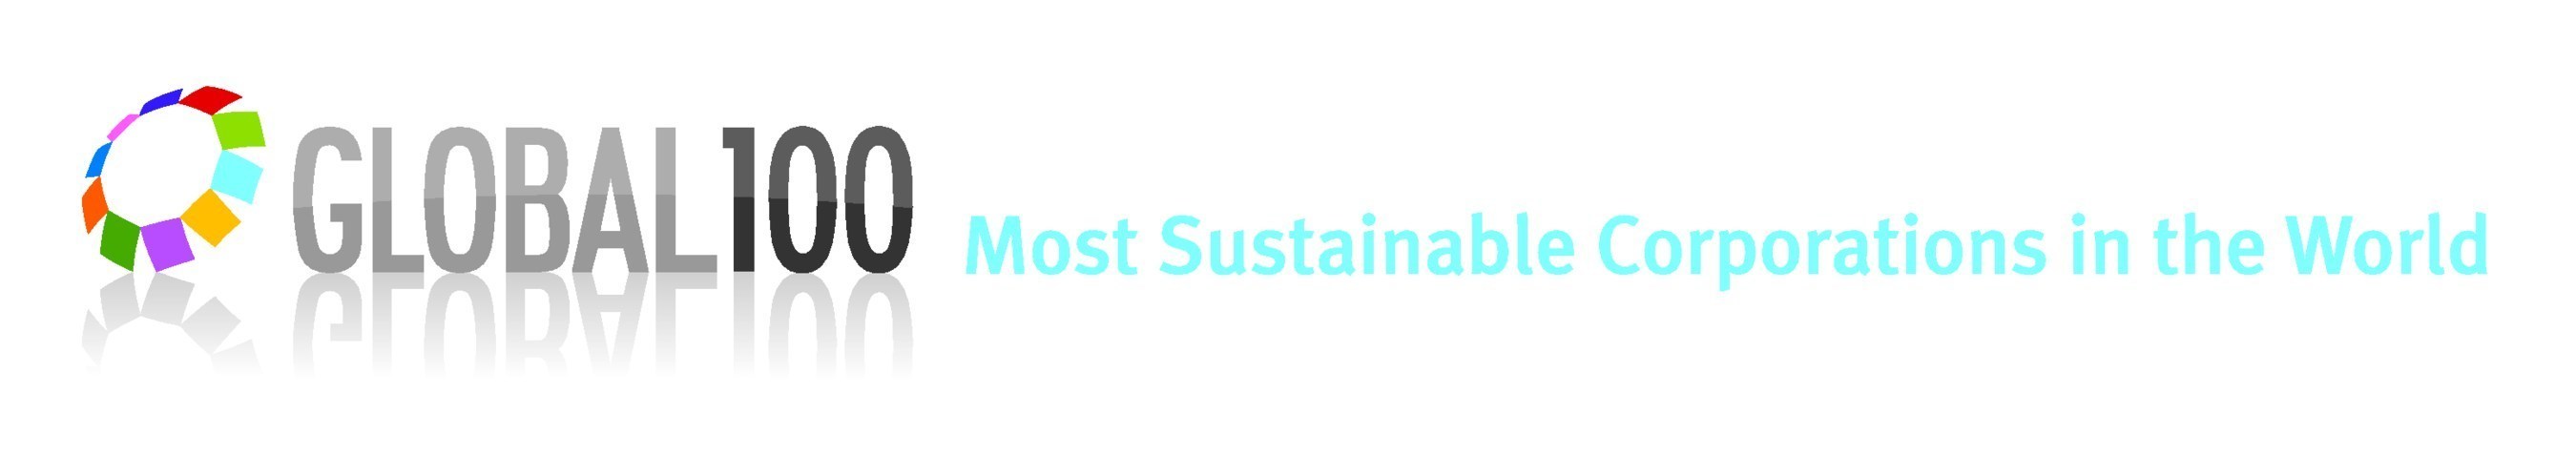 Global 100 Most Sustainable Corporations in the World